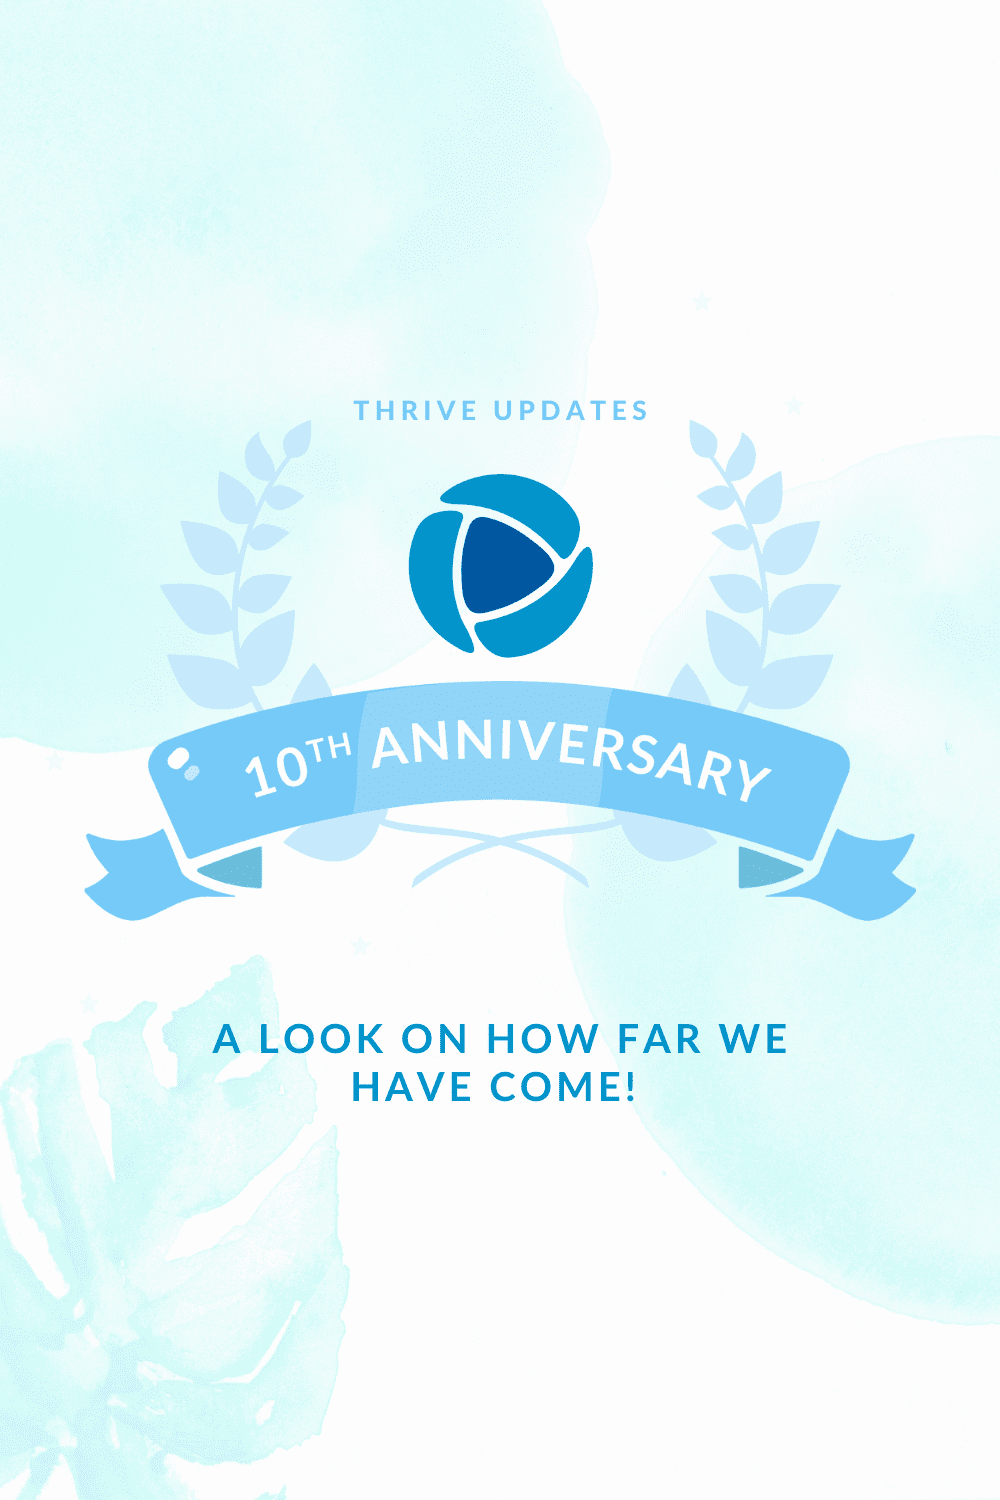 Our 10 year anniversary!